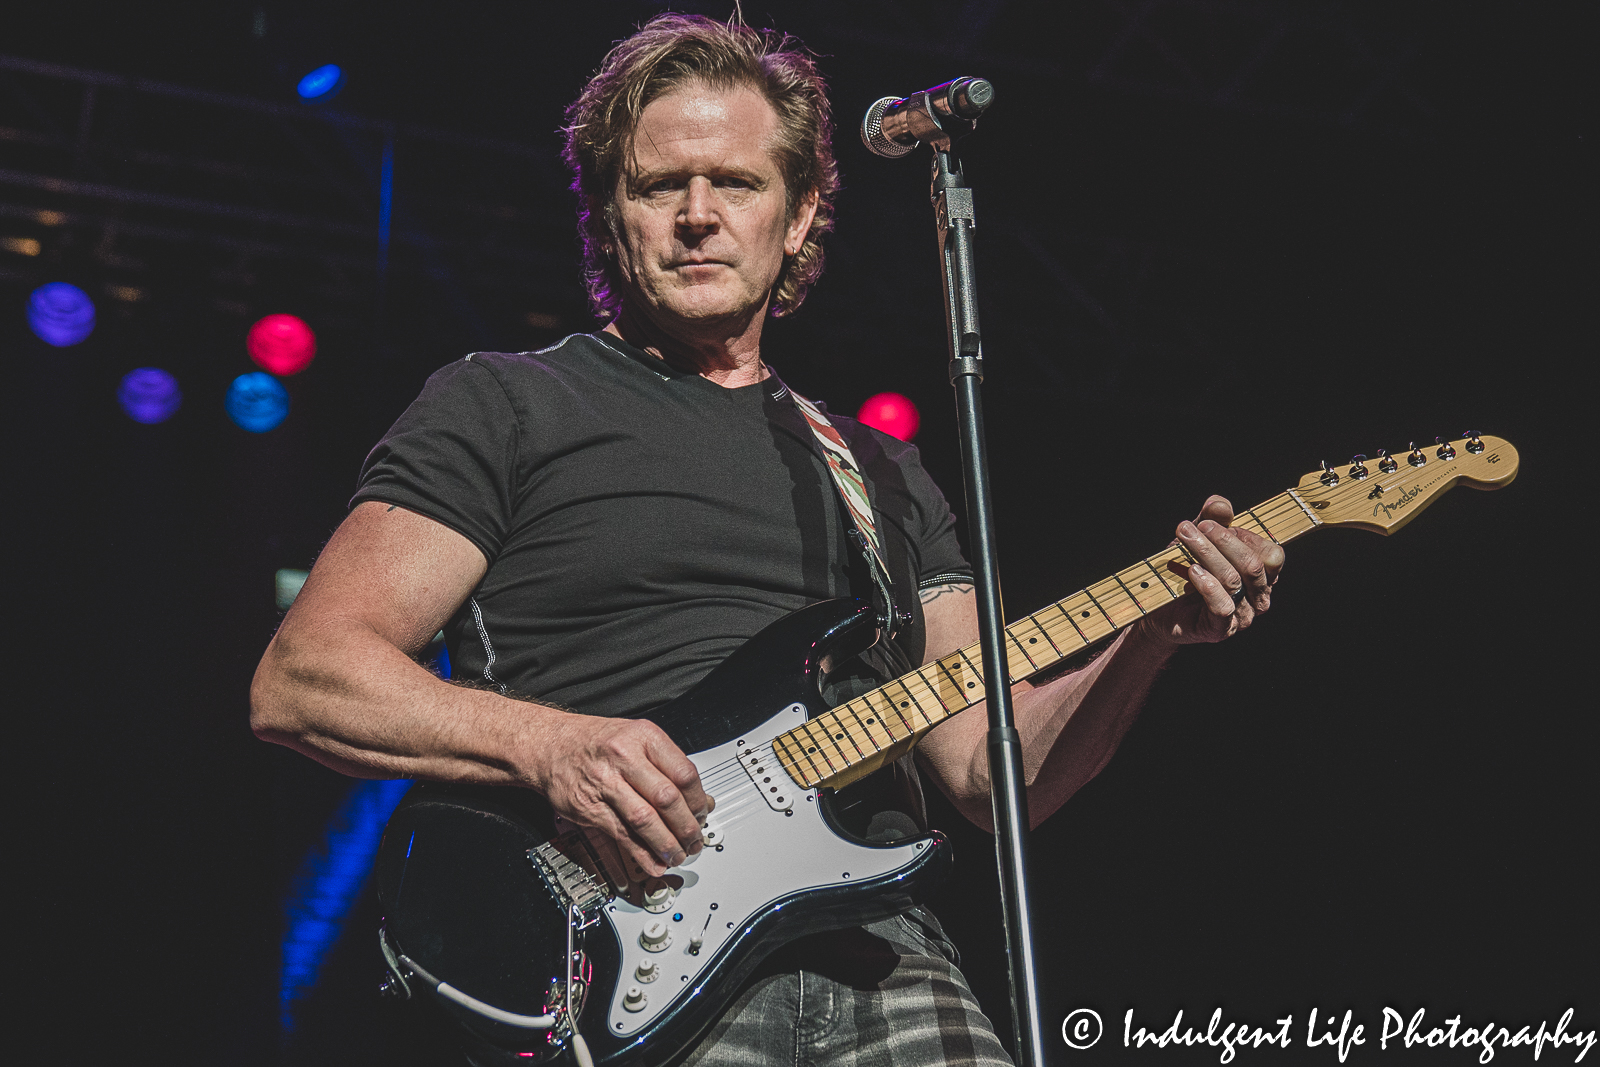 Shooting Star frontman Todd Pettygrove on guitar and performing at Ameristar Casino's Star Pavilion in Kansas City, MO on April 9, 2022.